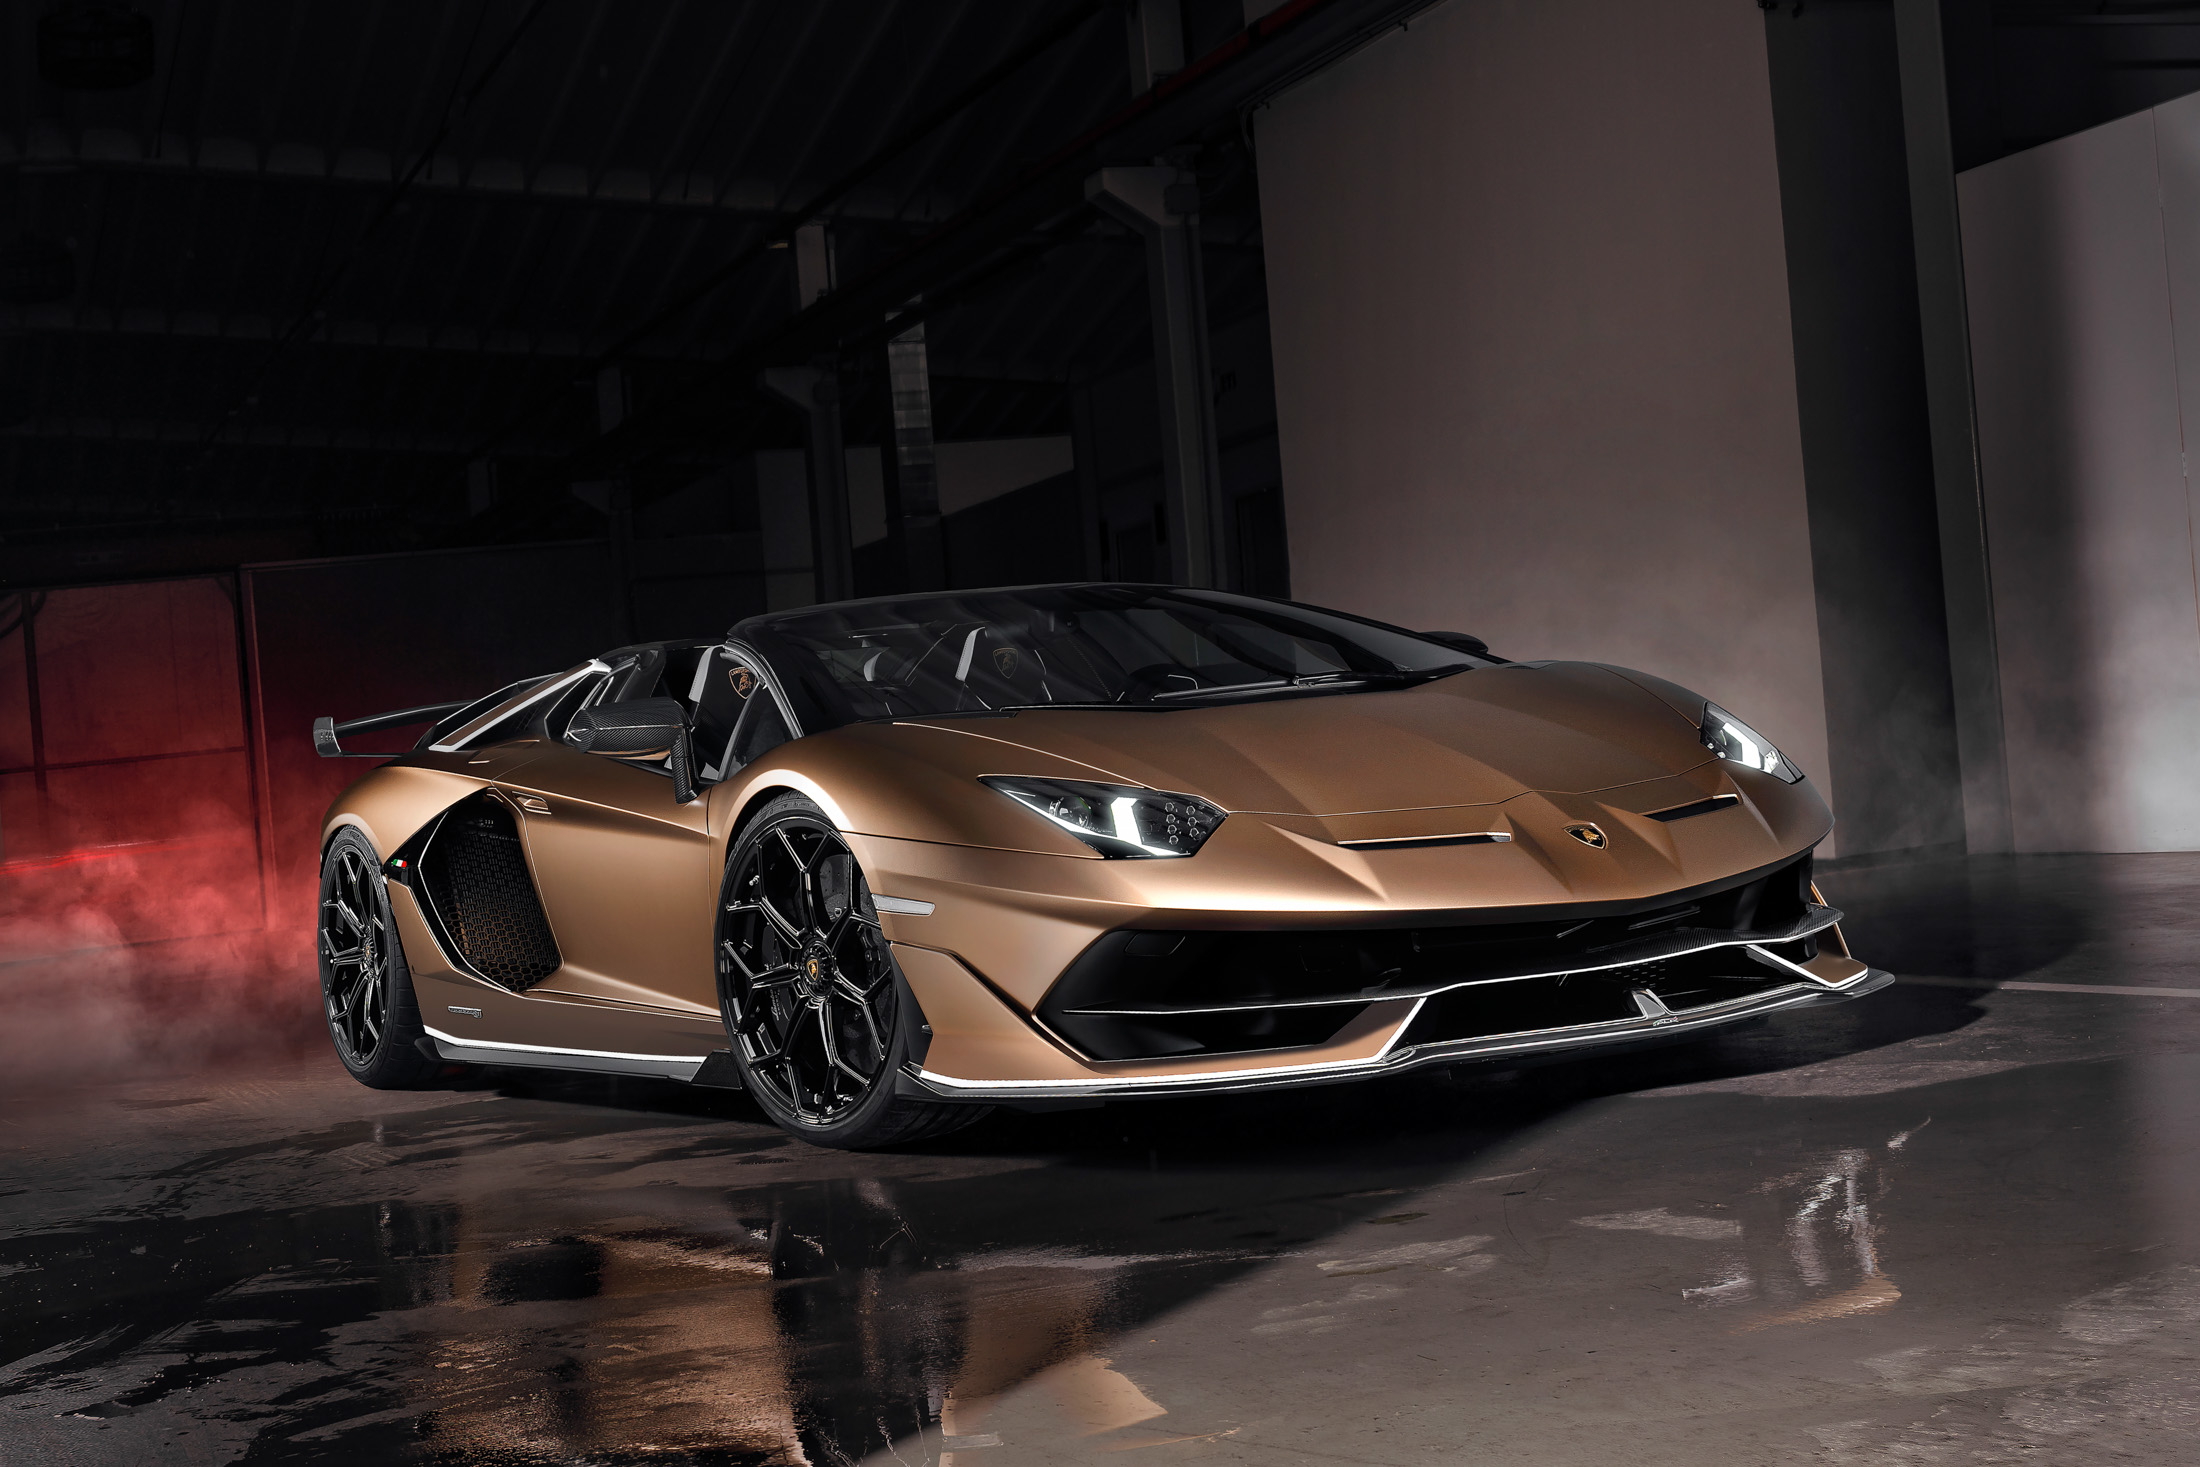 2021 Lamborghini Aventador SVJ Roadster Is Unadulterated Excess: Review -  Bloomberg